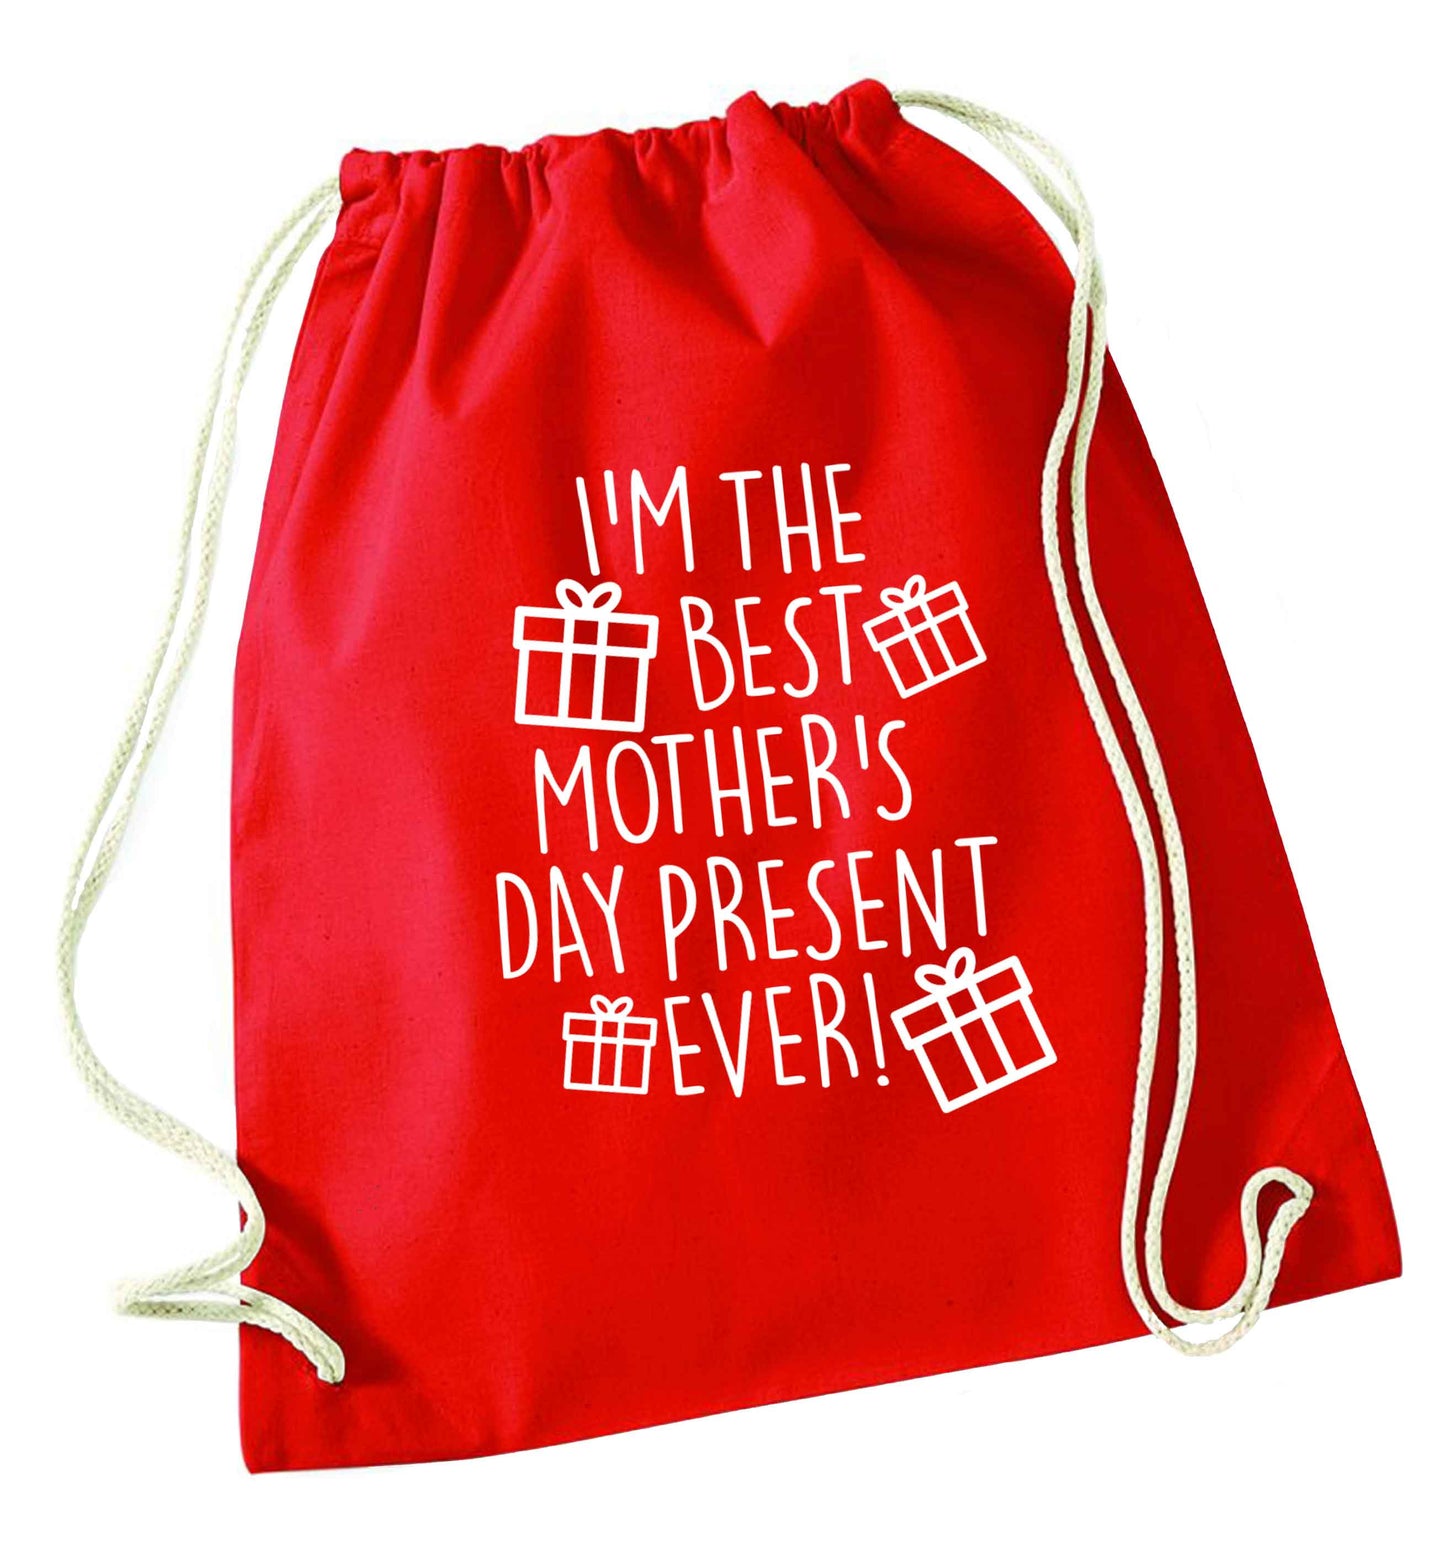 I'm the best mother's day present ever! red drawstring bag 